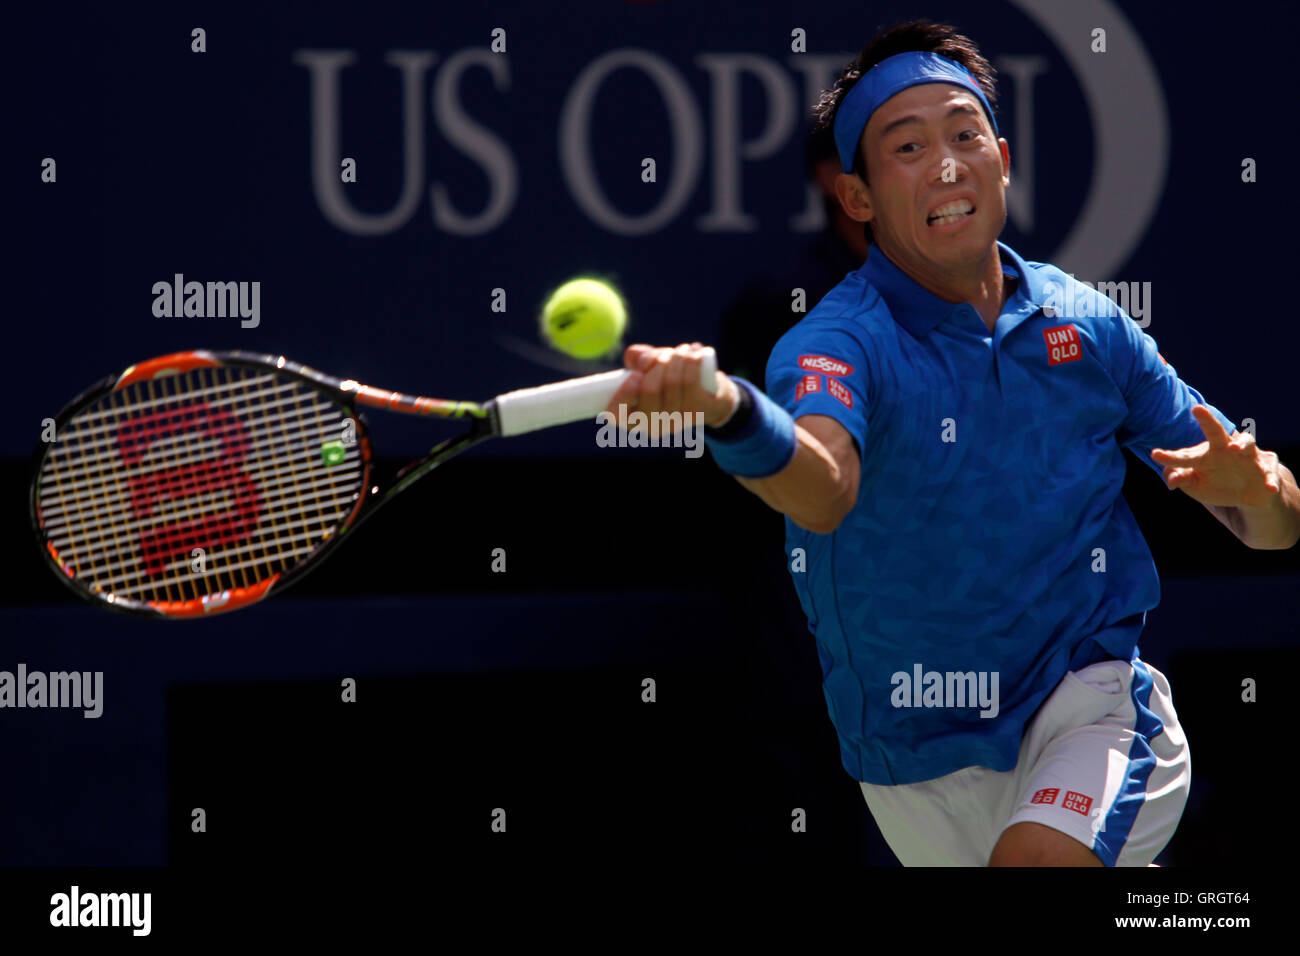 Flushing Meadows, New York, USA. 7th September, 2016. New York, USA. 7th September, 2016. Kei Nishikori of Japan during his quarter final match against Andy Murray of Great Britain at the United States Open Tennis Championships at Flushing Meadows, New York on Wednesday, September 7th © Adam Stoltman/Alamy Live News Credit:  Adam Stoltman/Alamy Live News Stock Photo